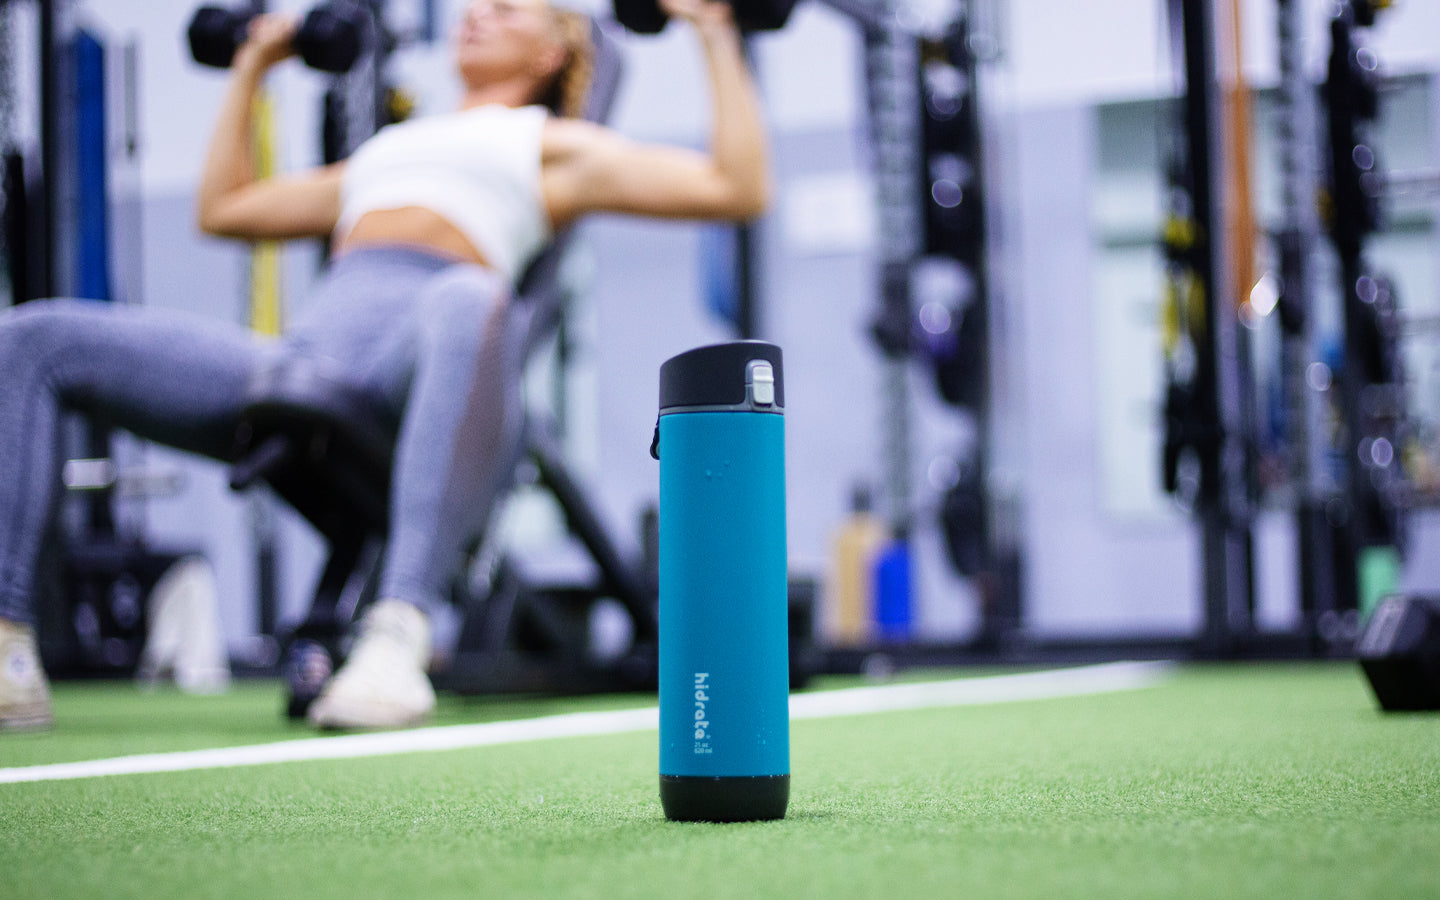 A 21 oz Seaglass color HidrateSpark smart water bottle sits in the foreground while a woman exercises in the background.